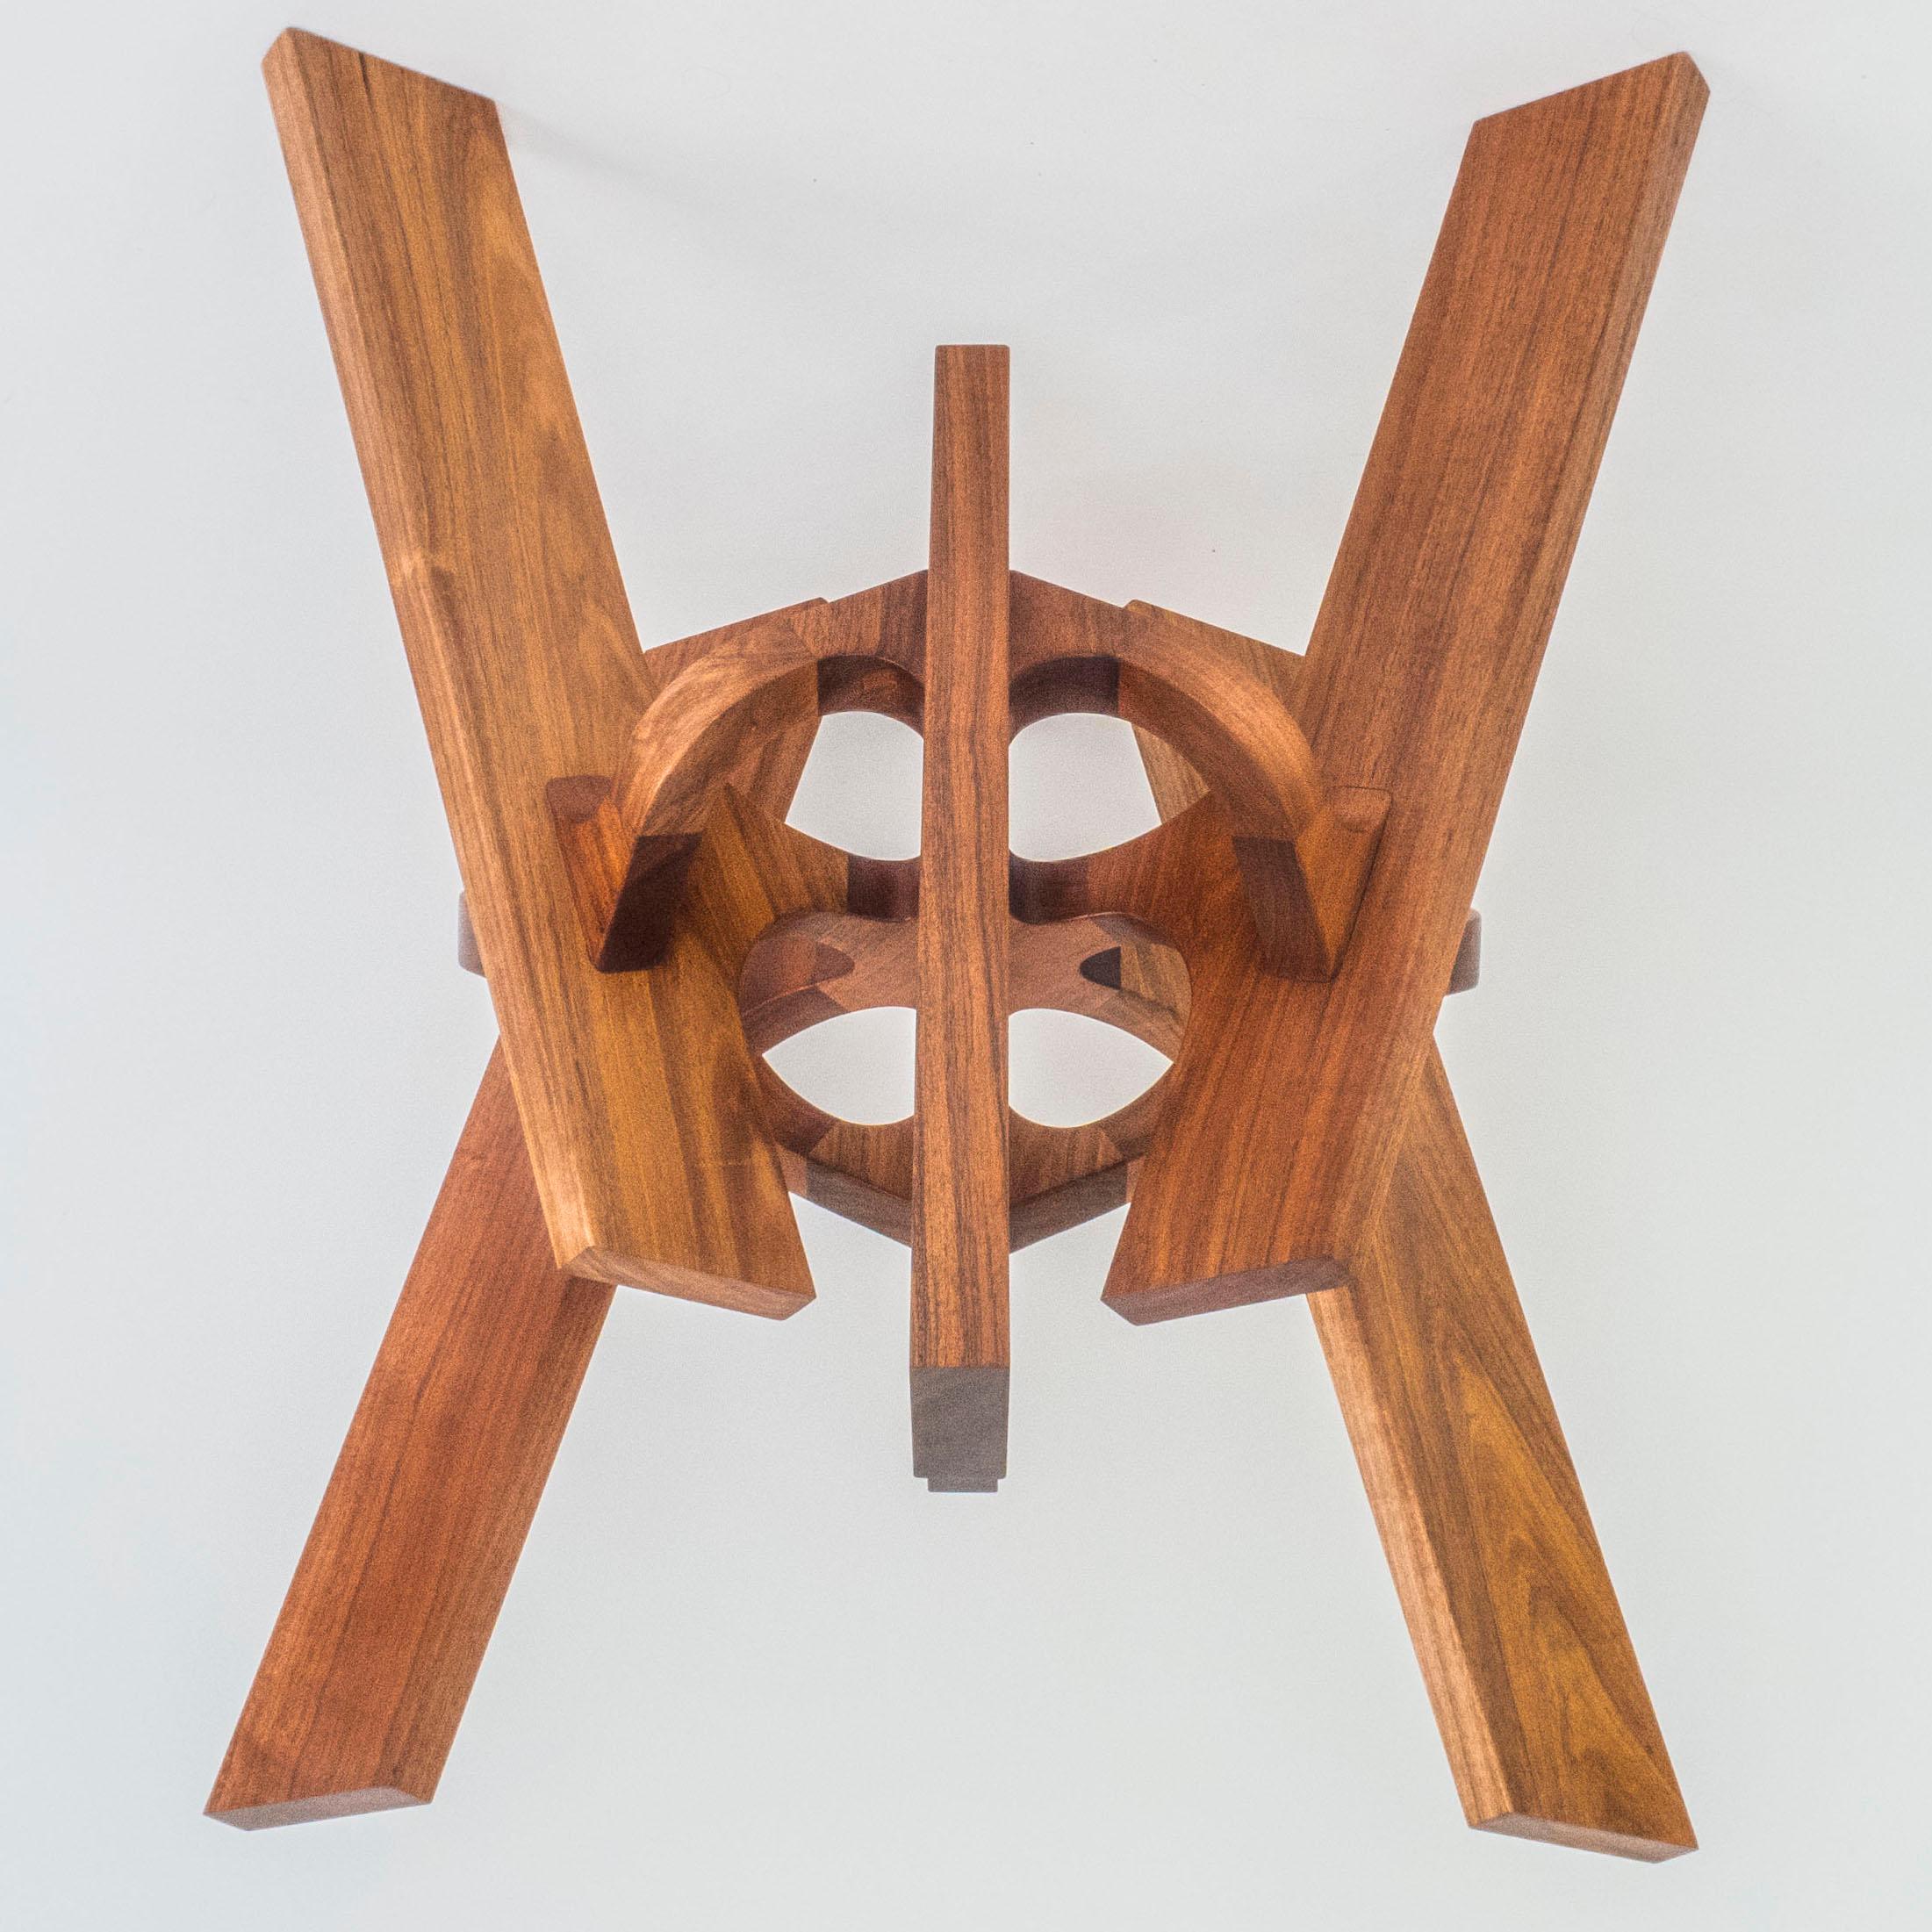 Astra, Geometric Sculptural Center Table Made of Solid Wood by Pedro Cerisola For Sale 3